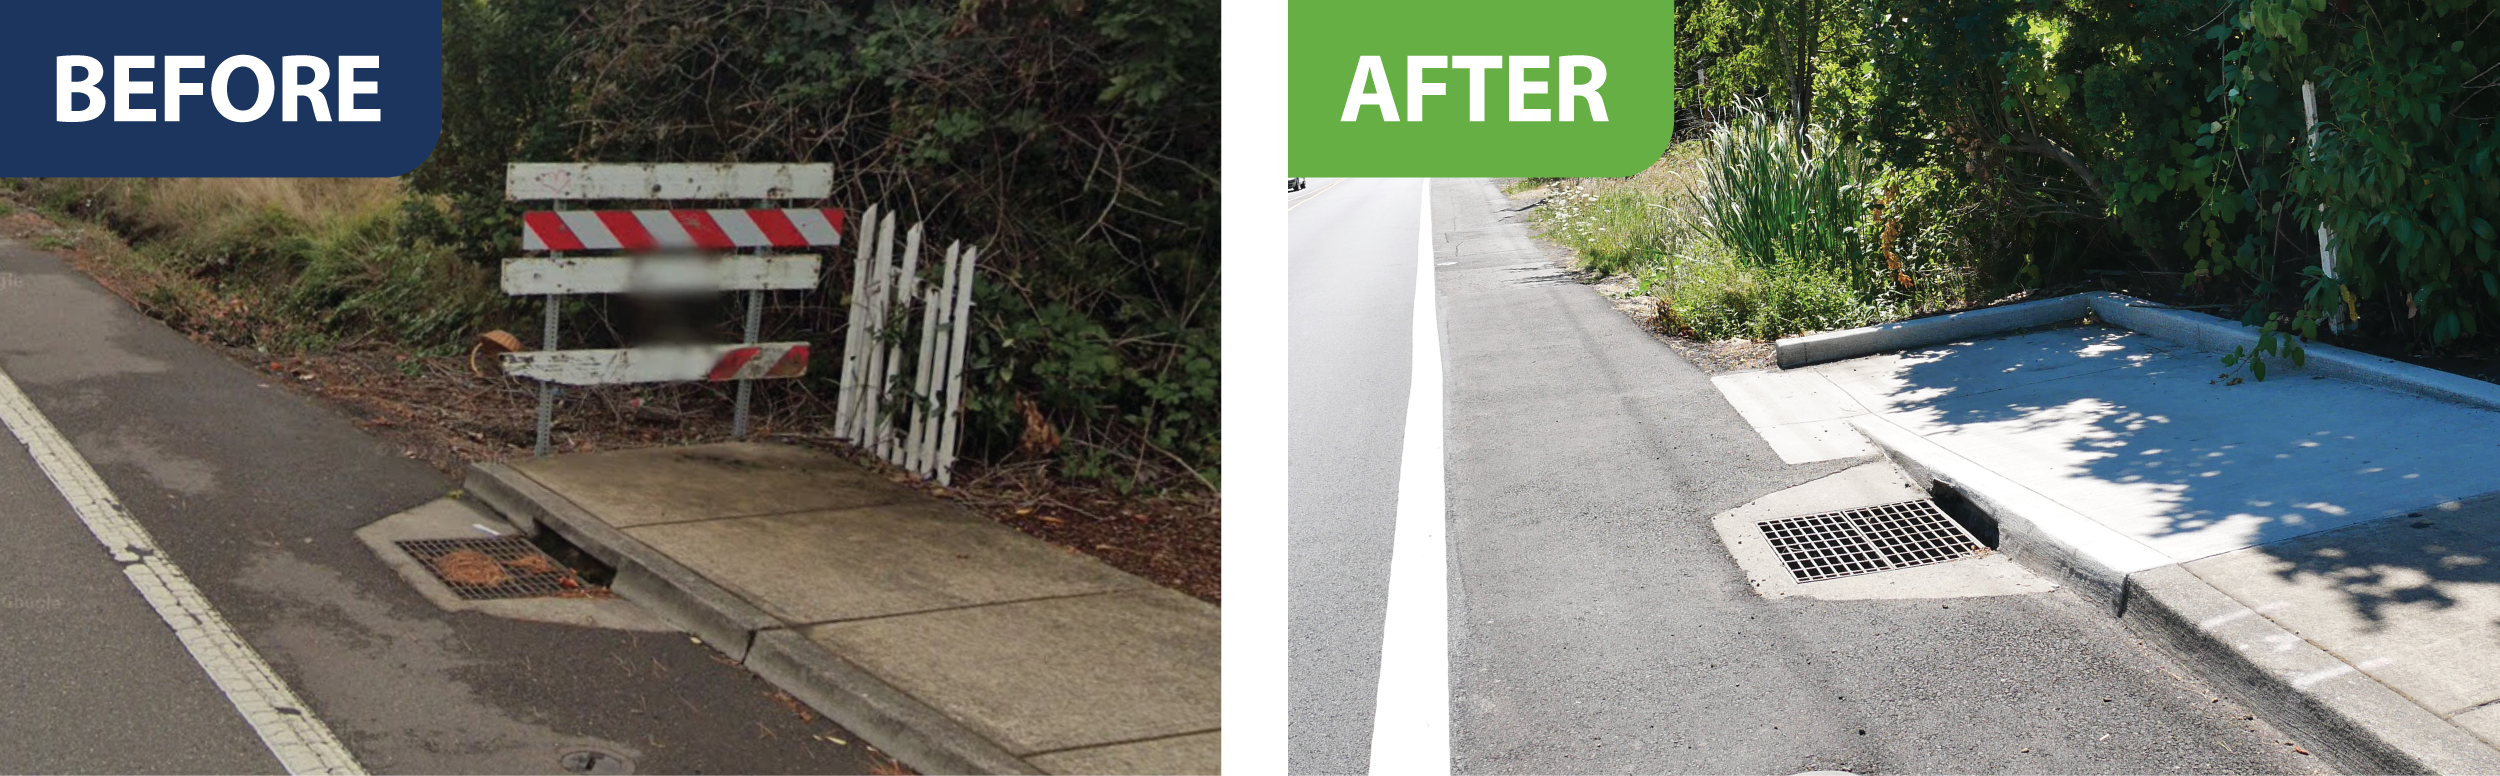 End of the sidewalk near the intersection of SW Hall Boulevard and SW 92nd Avenue before and after improvements.